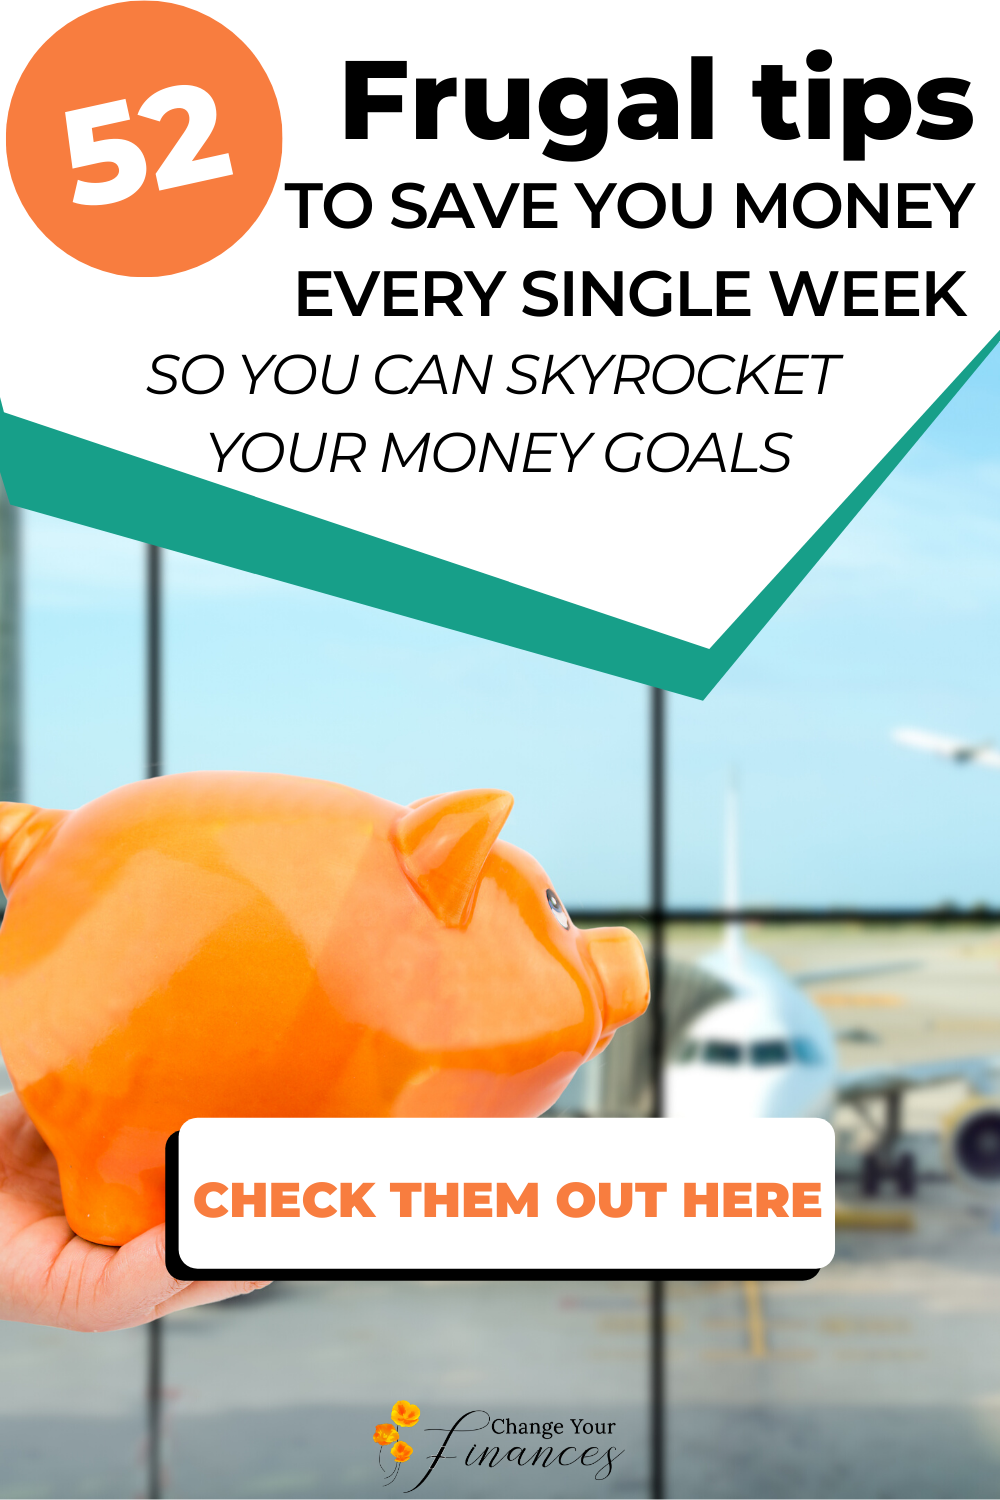 52 Simple tips to greatly reduce your monthly expenses, boost your savings, and create financial peace. Do one each week and crush your savings goals! #savings #savingmoney #savemoney #freeworksheet #savingsgoals #savingtips #moneytips #moneygoals #personalfinance #finance #budget #payoffdebt |Change Your Finances